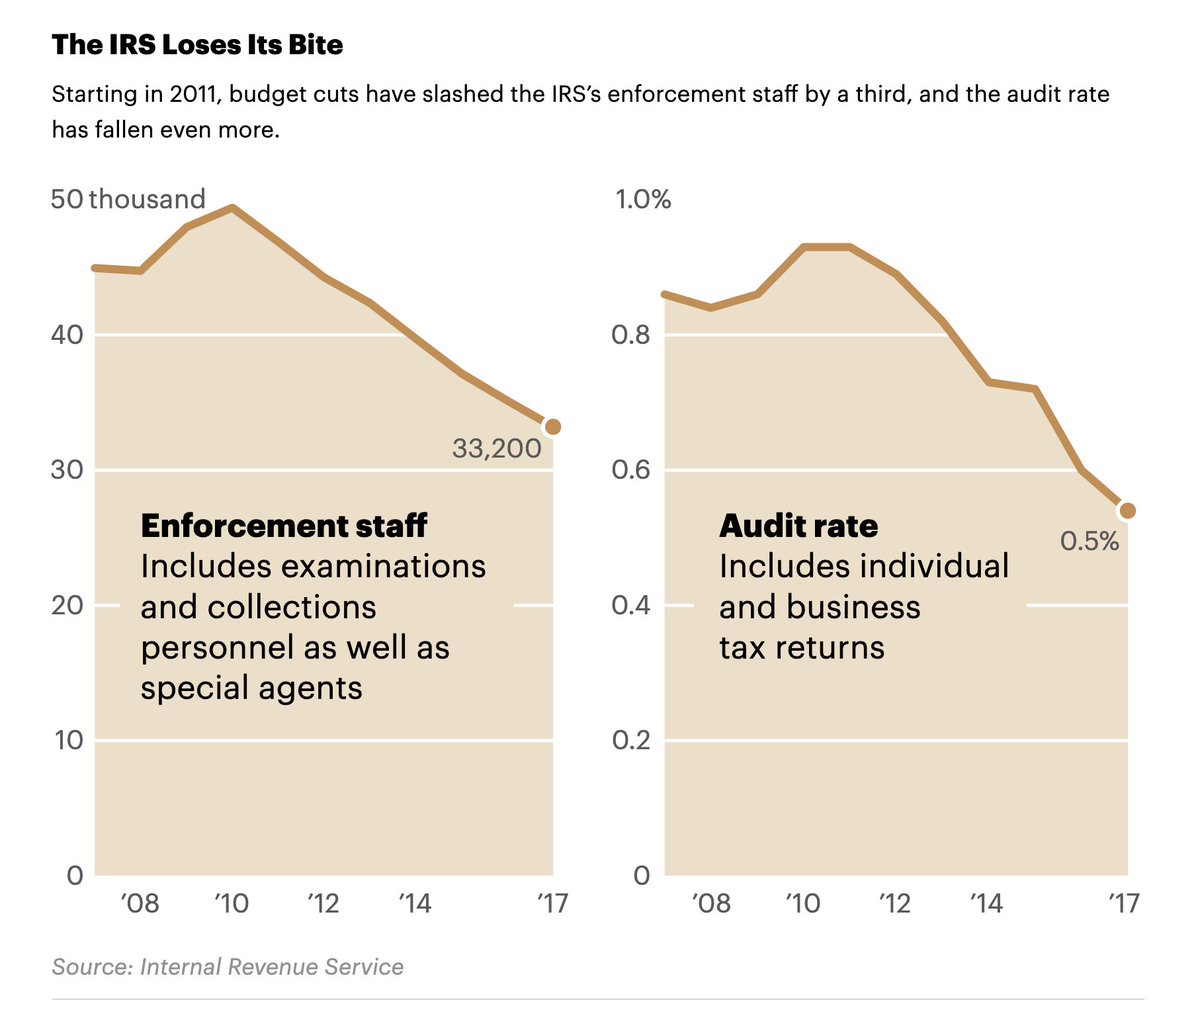 3/ By 2017, the IRS enforcement staff had been cut by a third, its criminal division brought about 25% fewer cases in which tax fraud was the primary crime, and audits had been nearly halved.